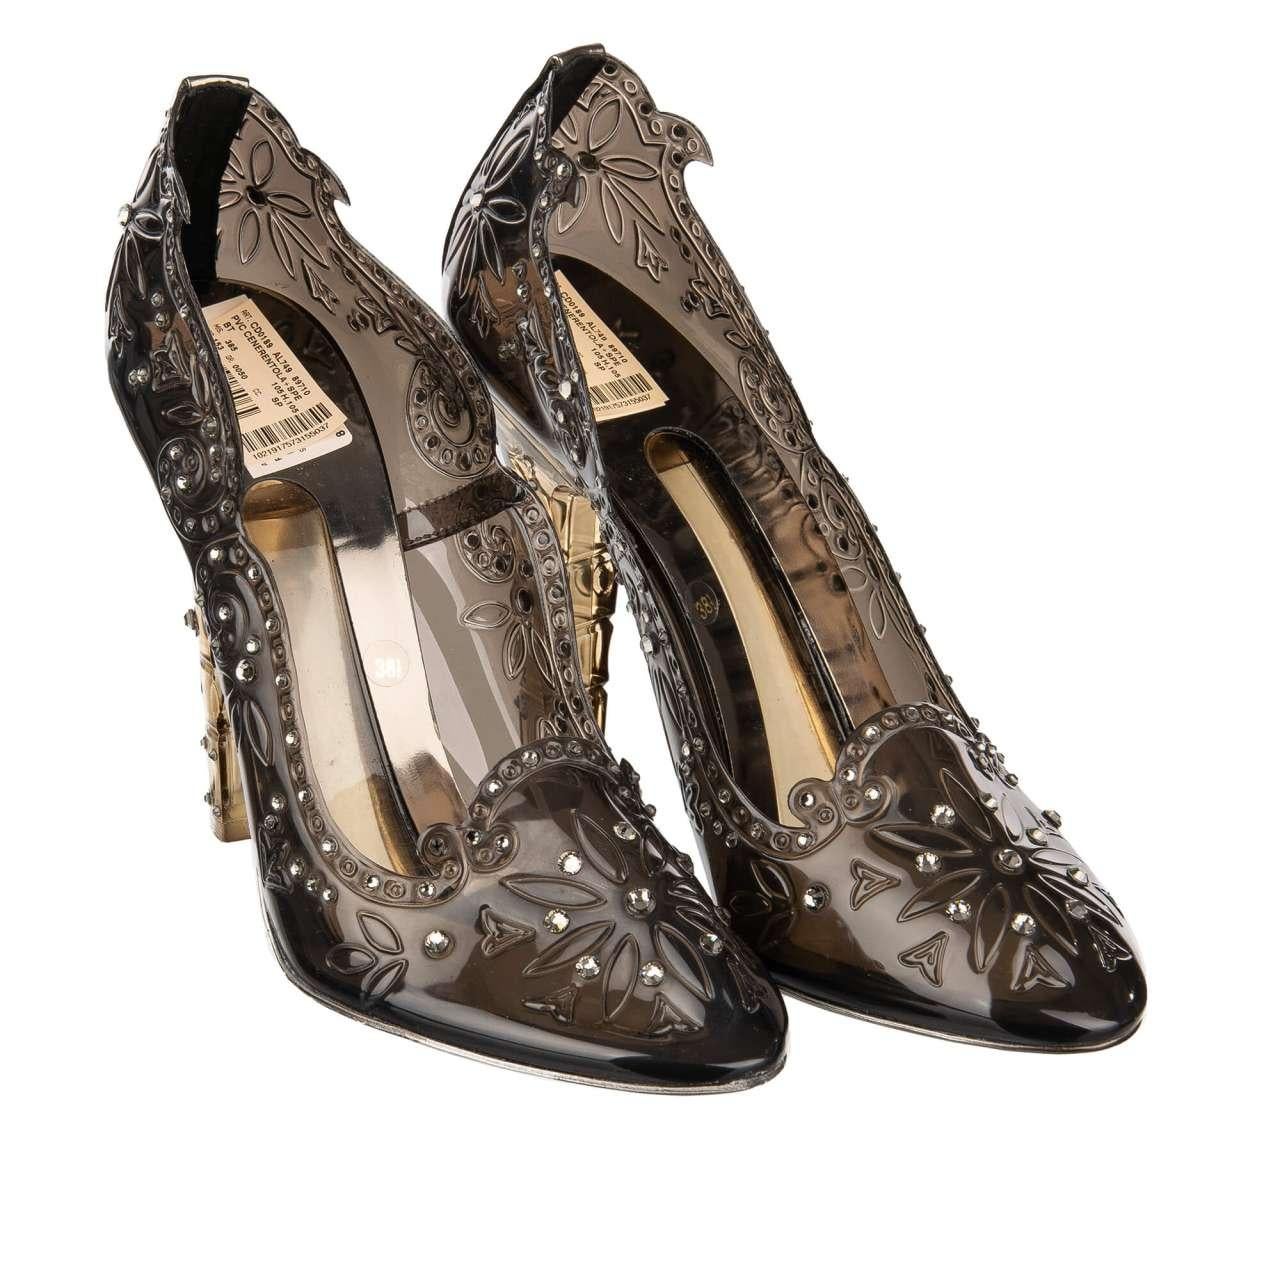 - Cinderella transparent Pumps made of PVC embellished with rhinestones in brown by DOLCE & GABBANA  - RUNWAY - Dolce&Gabbana Fashion Show - Former RRP: EUR 1.150 - MADE IN ITALY - New with Box - Rhinestones embellishments - Model: